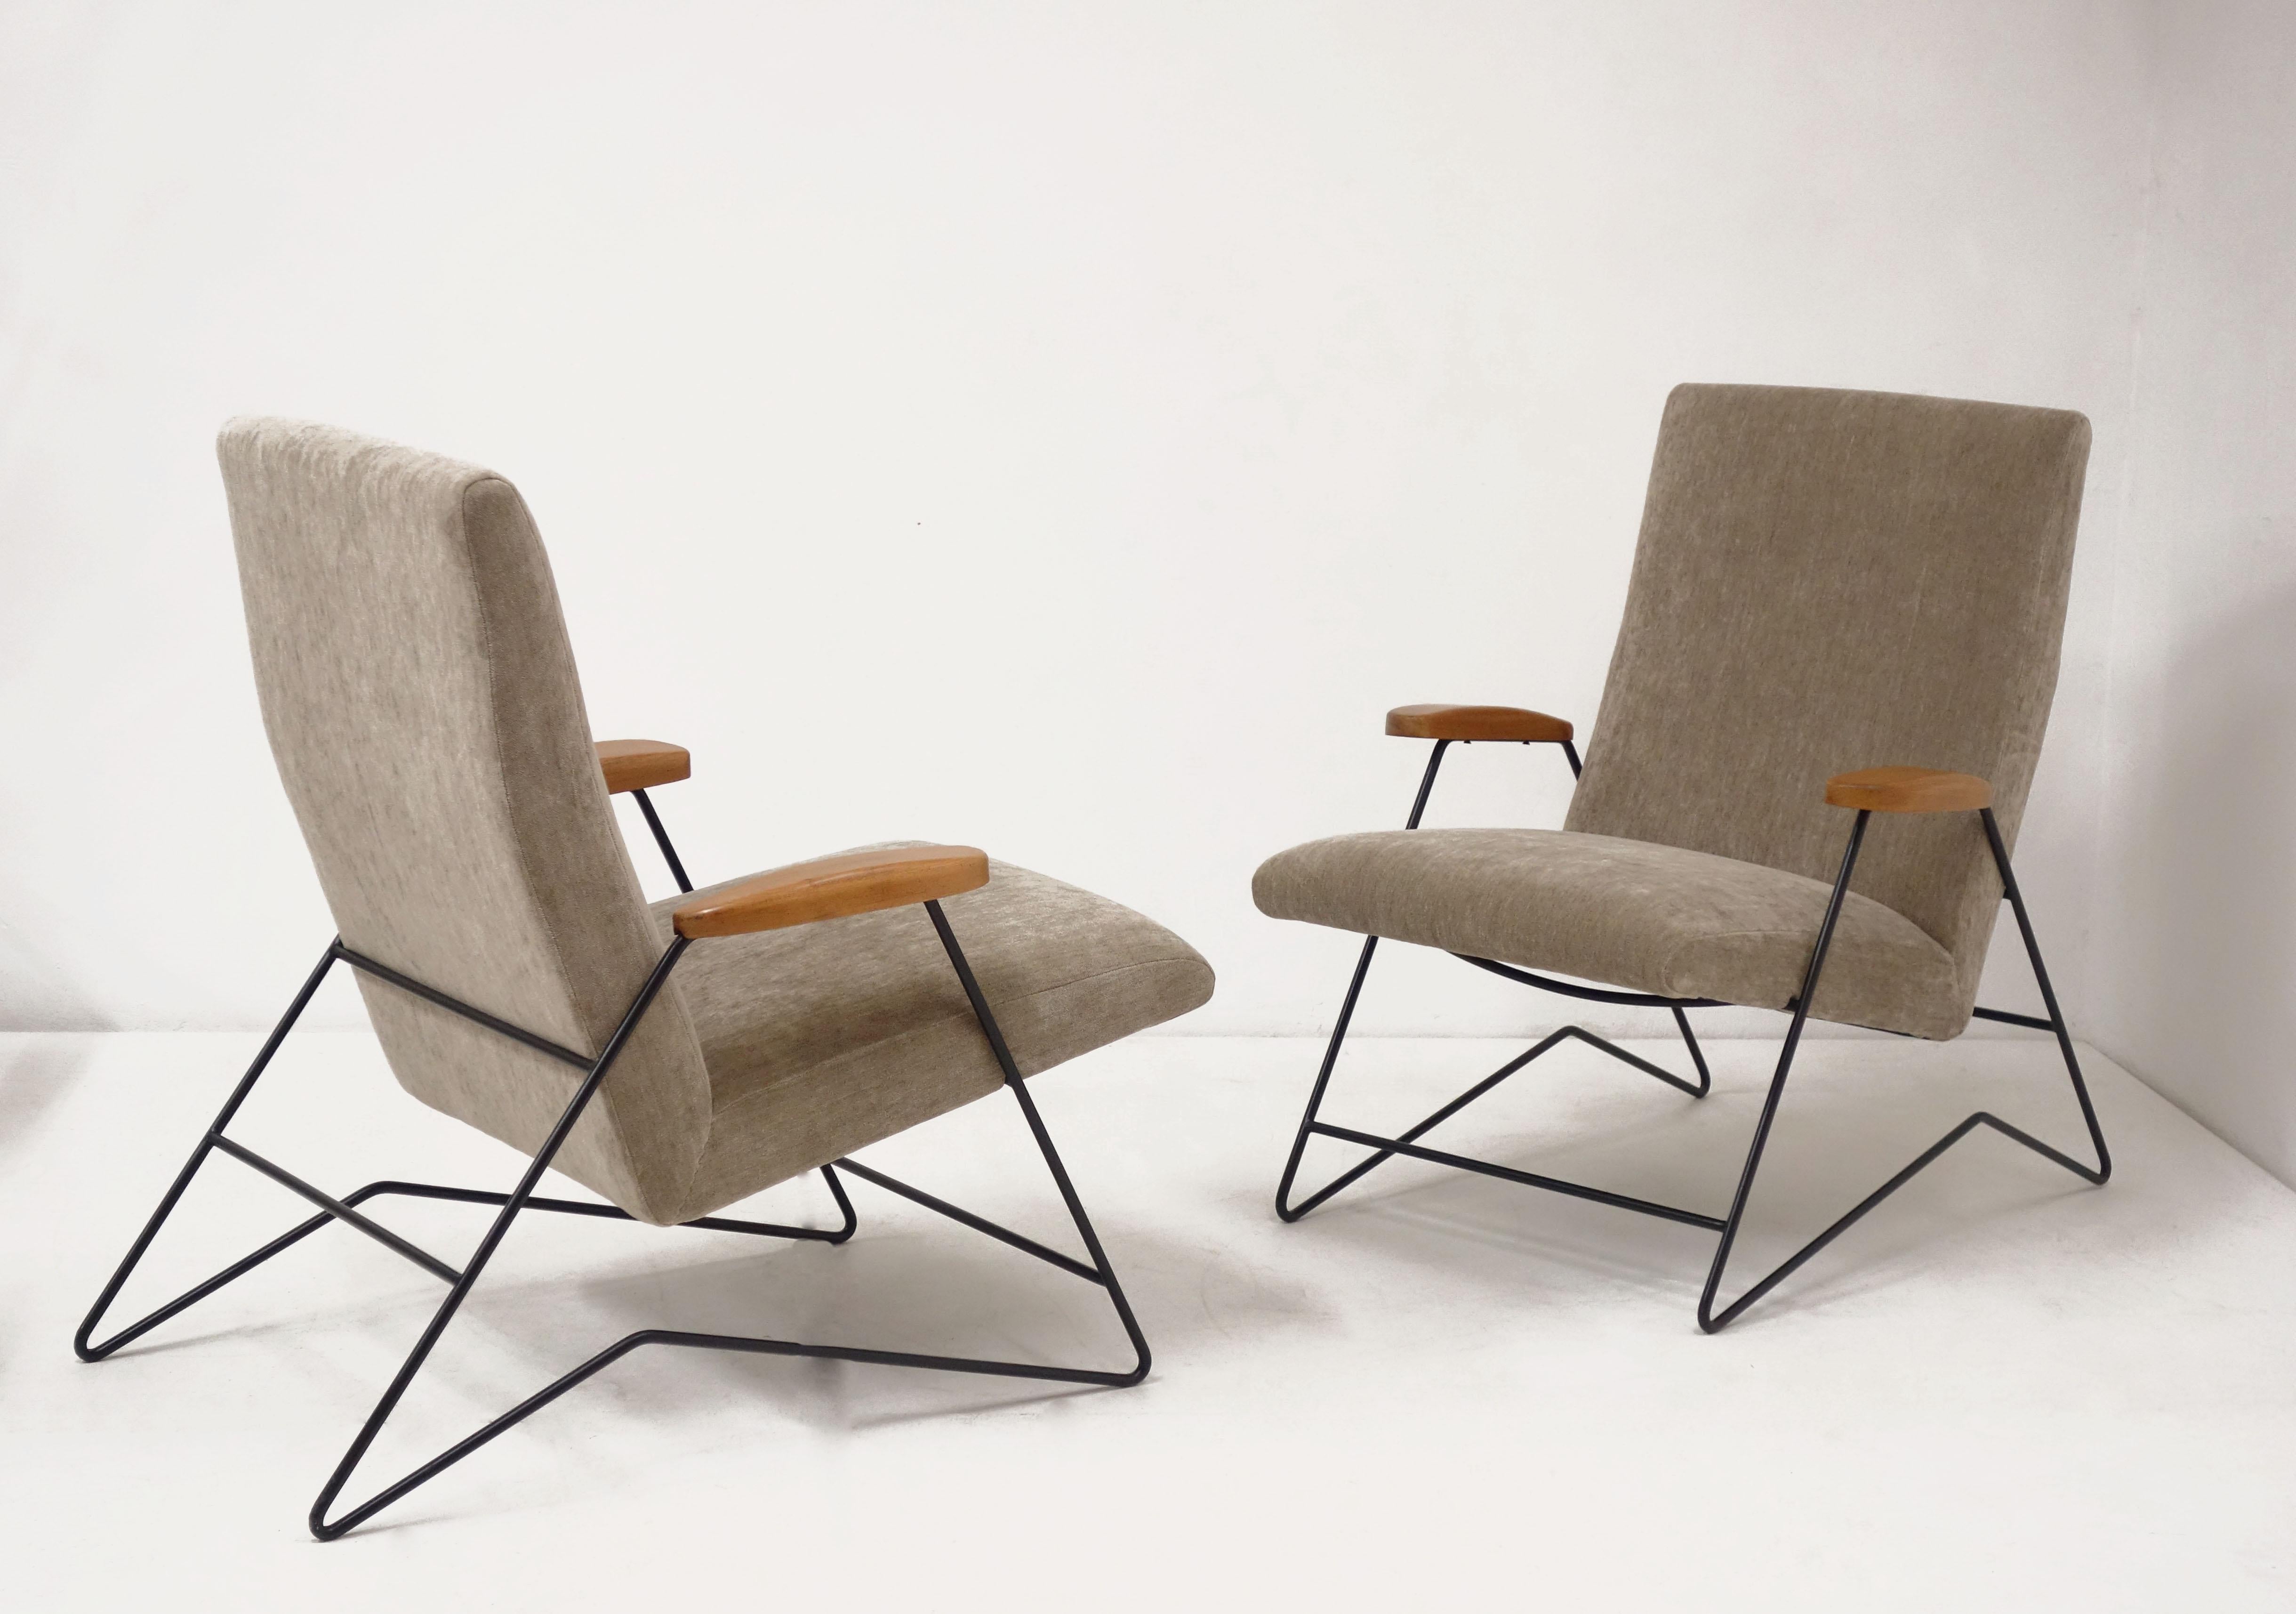 Brazilian Pair of Armchairs by Carlo Hauner and Martin Eisler, Forma Edition, circa 1955